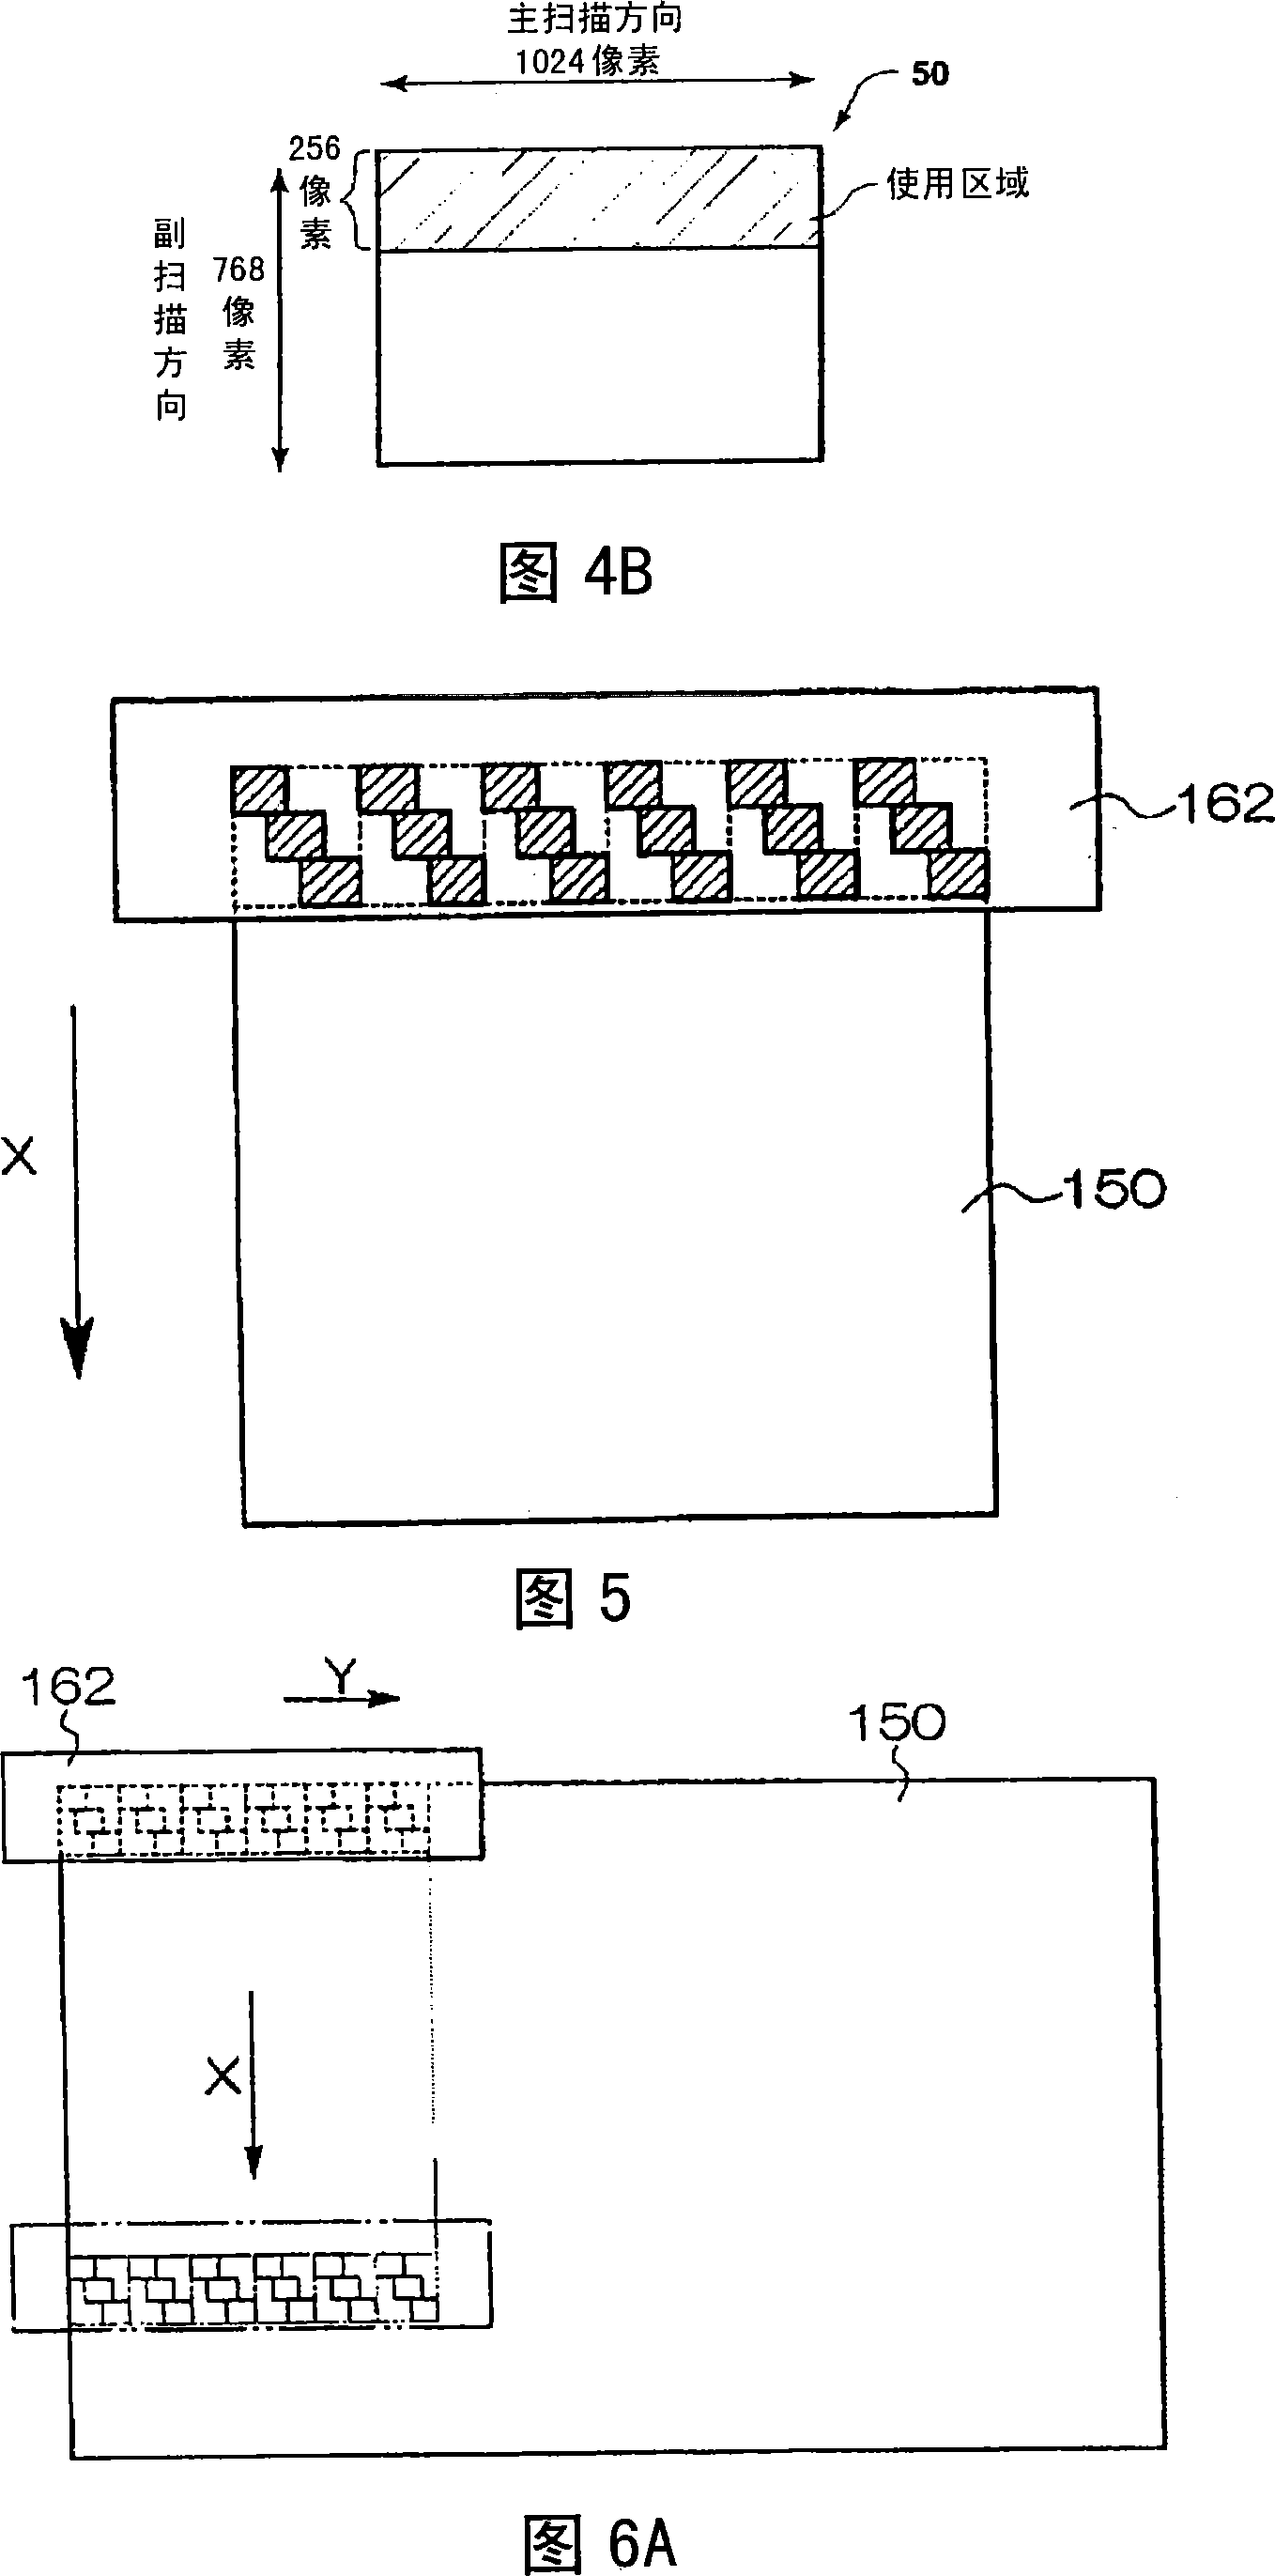 Photosensitive composition, method for forming pattern, and permanent pattern